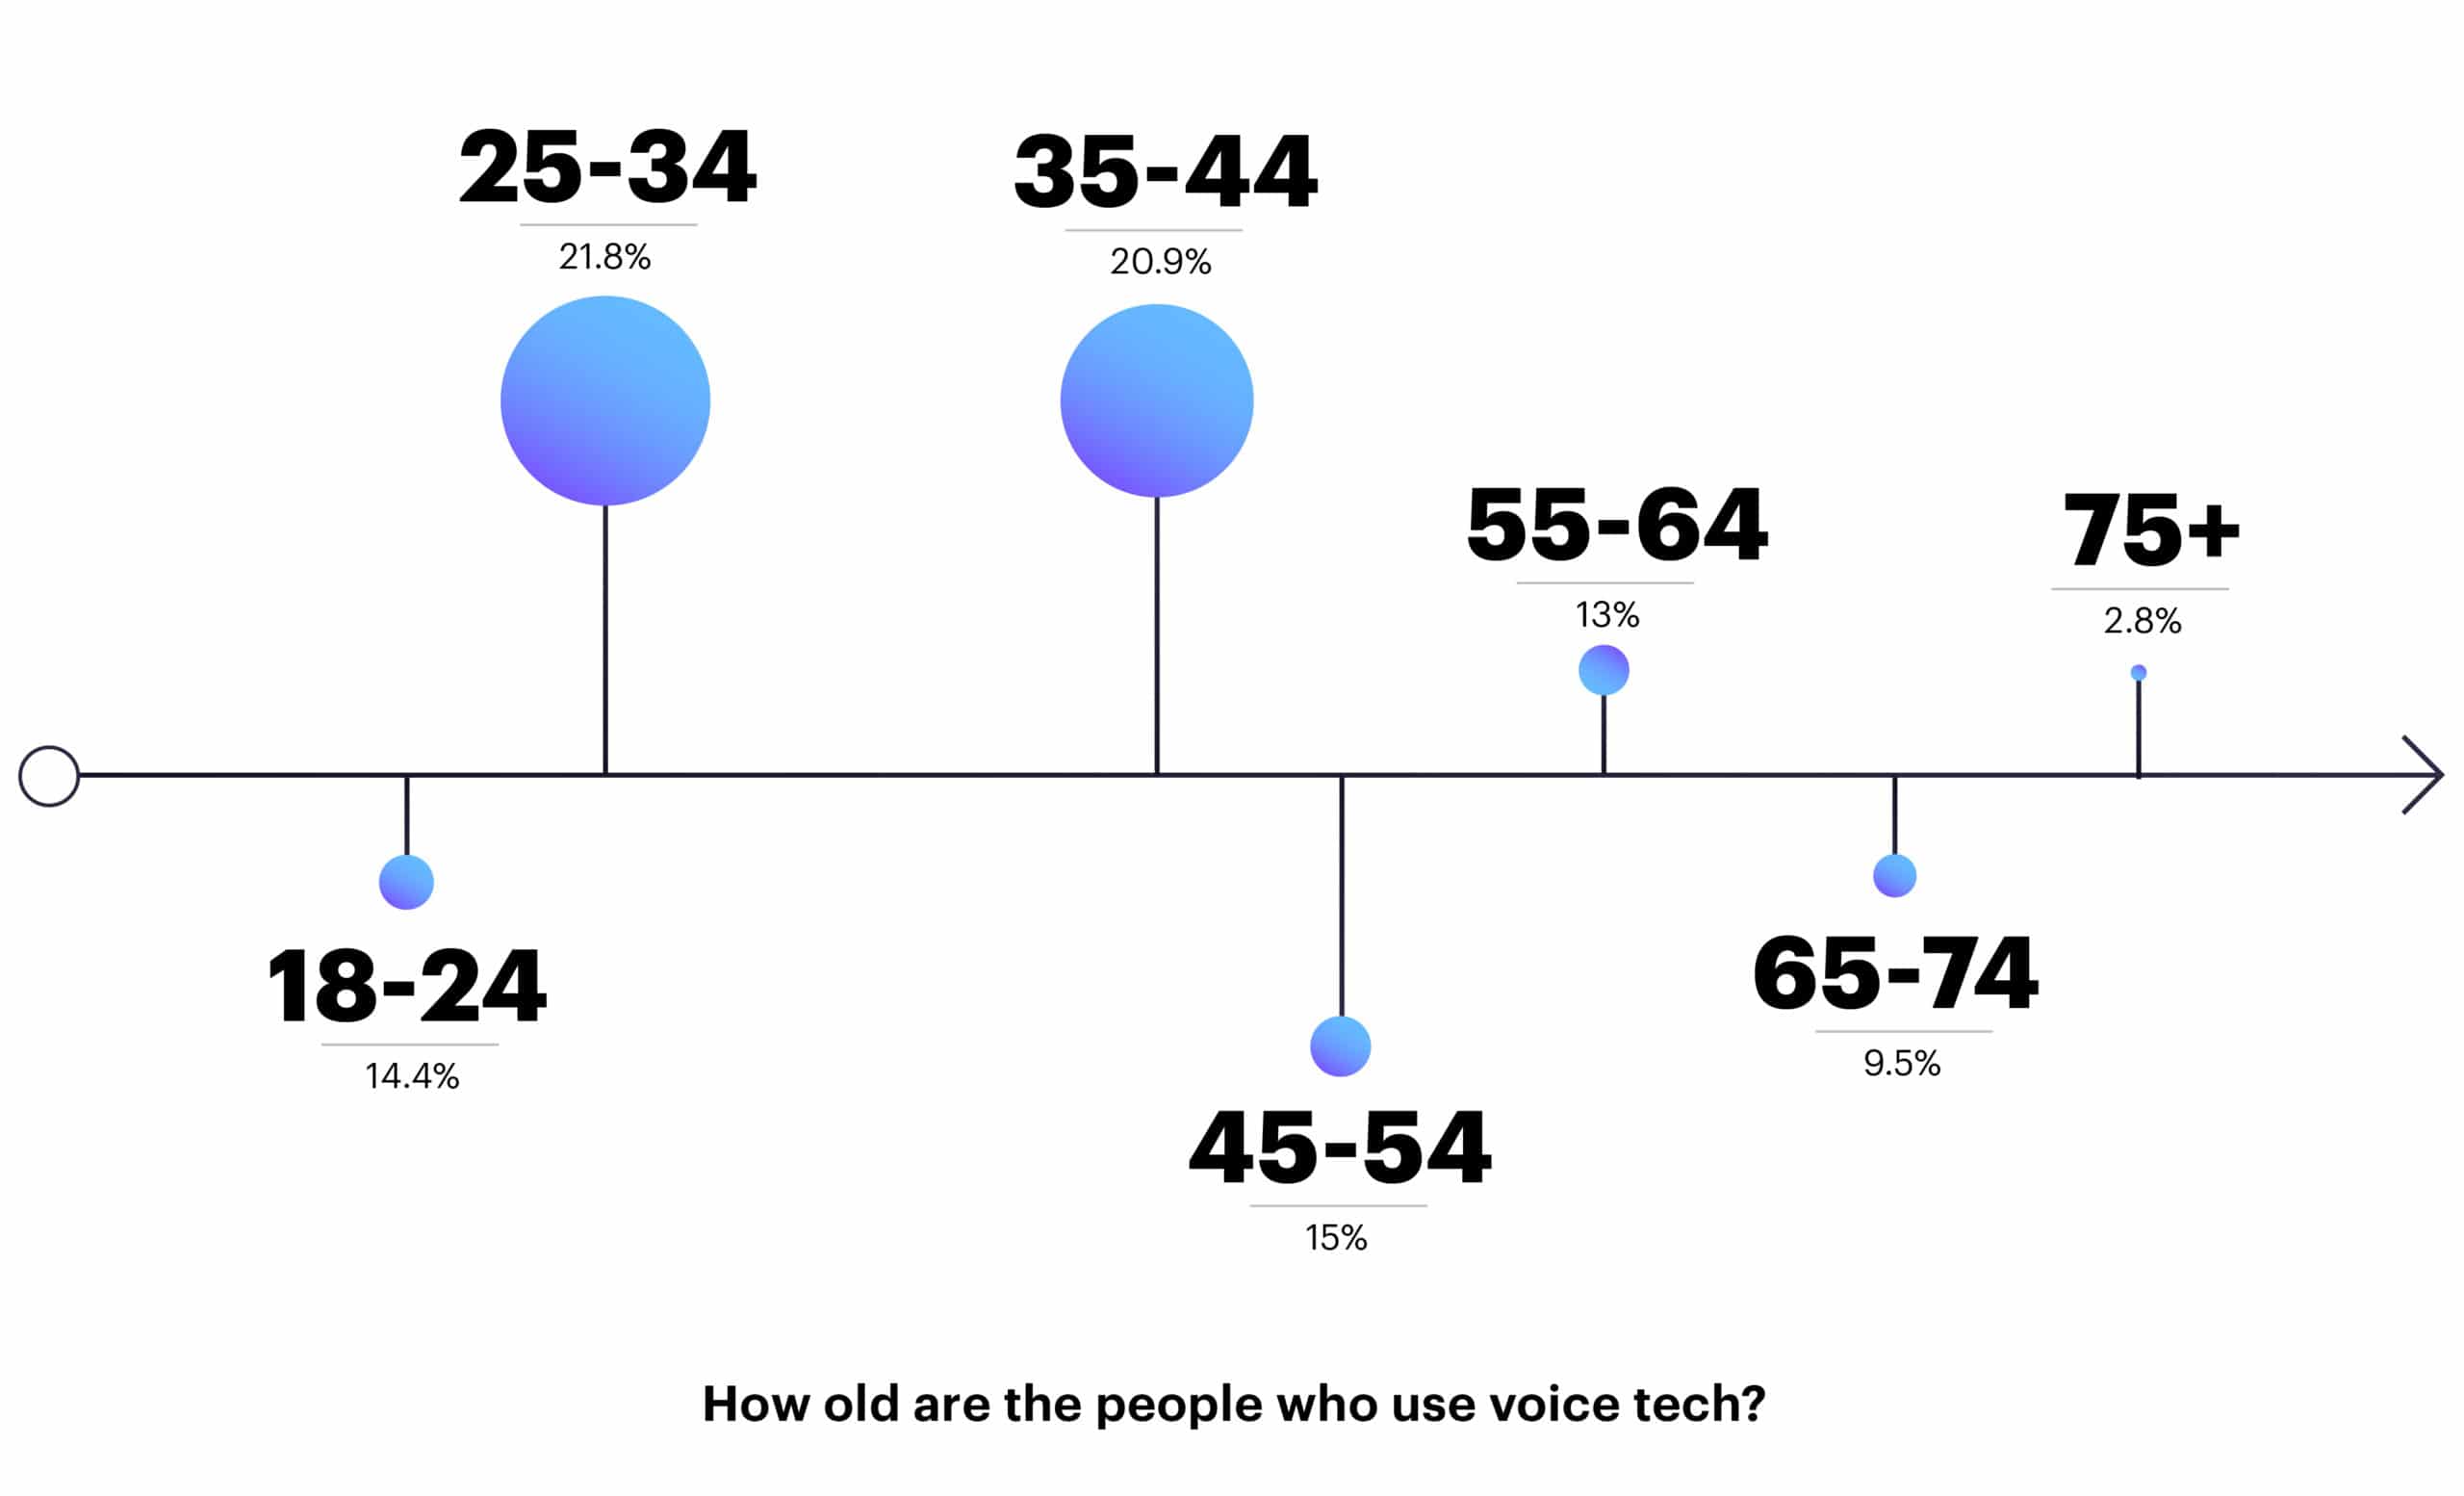 It's important to know the ages of your demographic, especially when embarking on new trends like voice technology.